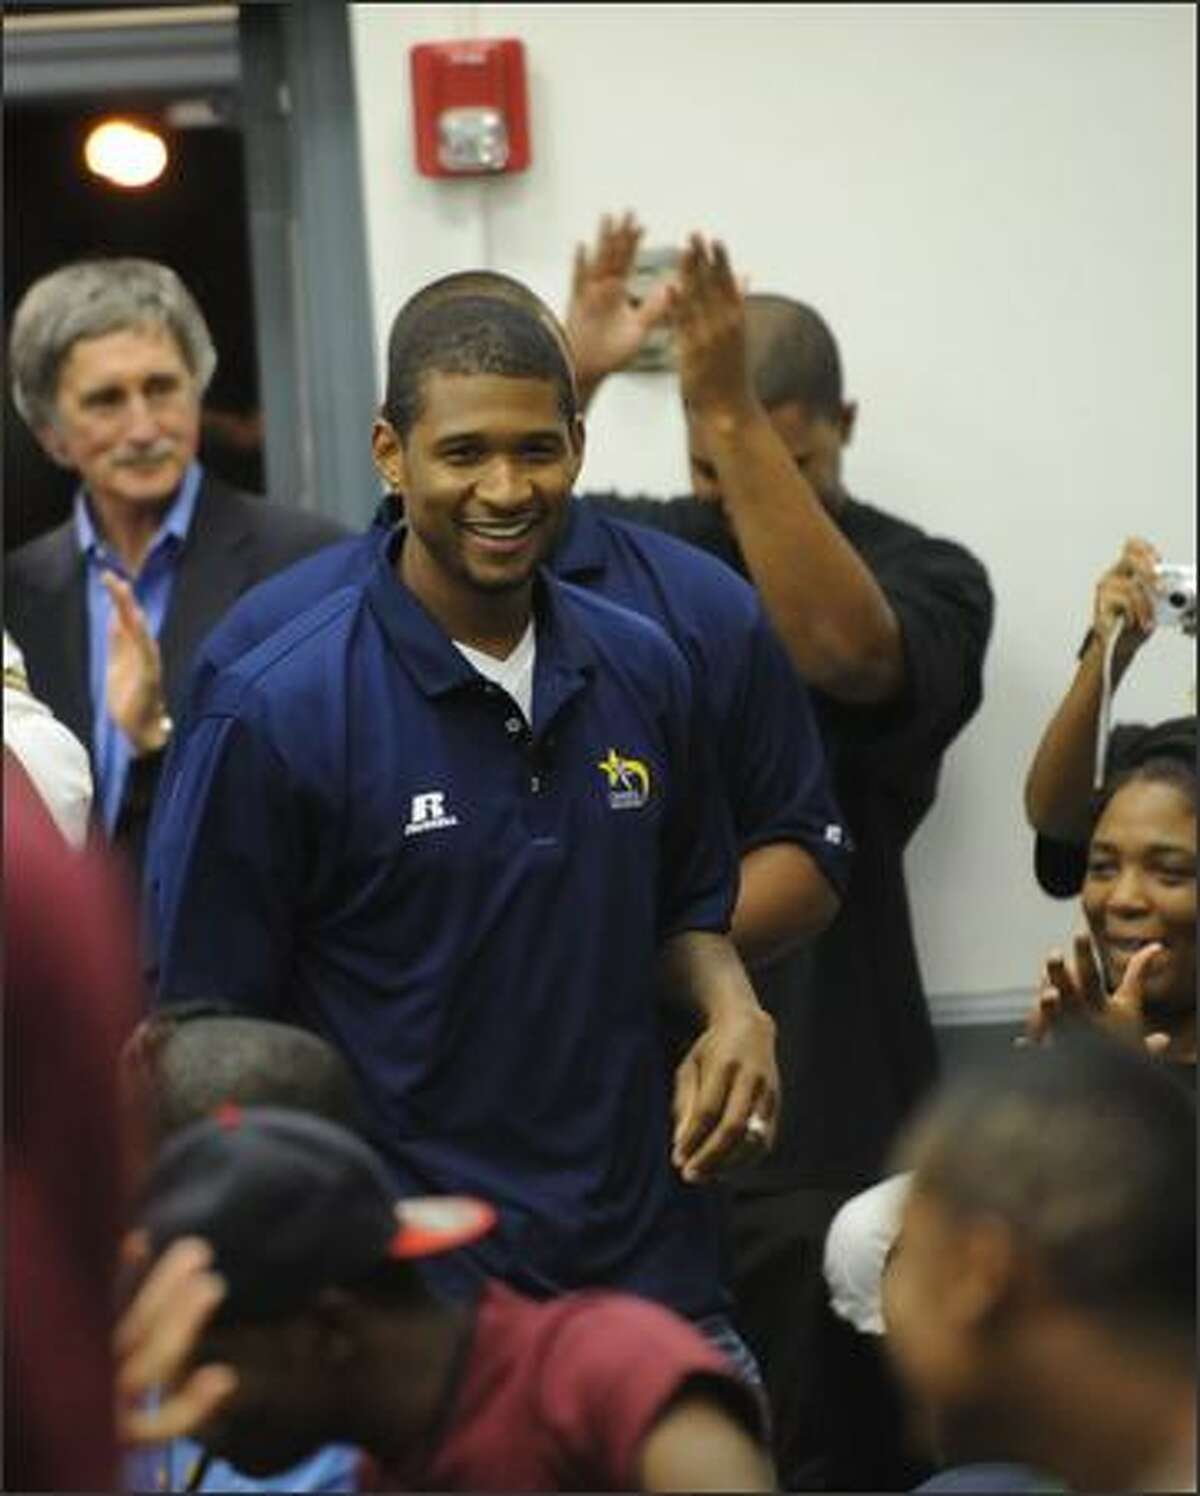 Usher arrives at his 4th Annual Camp New Look held at The Georgia Tech campus in Atlanta, Georgia.